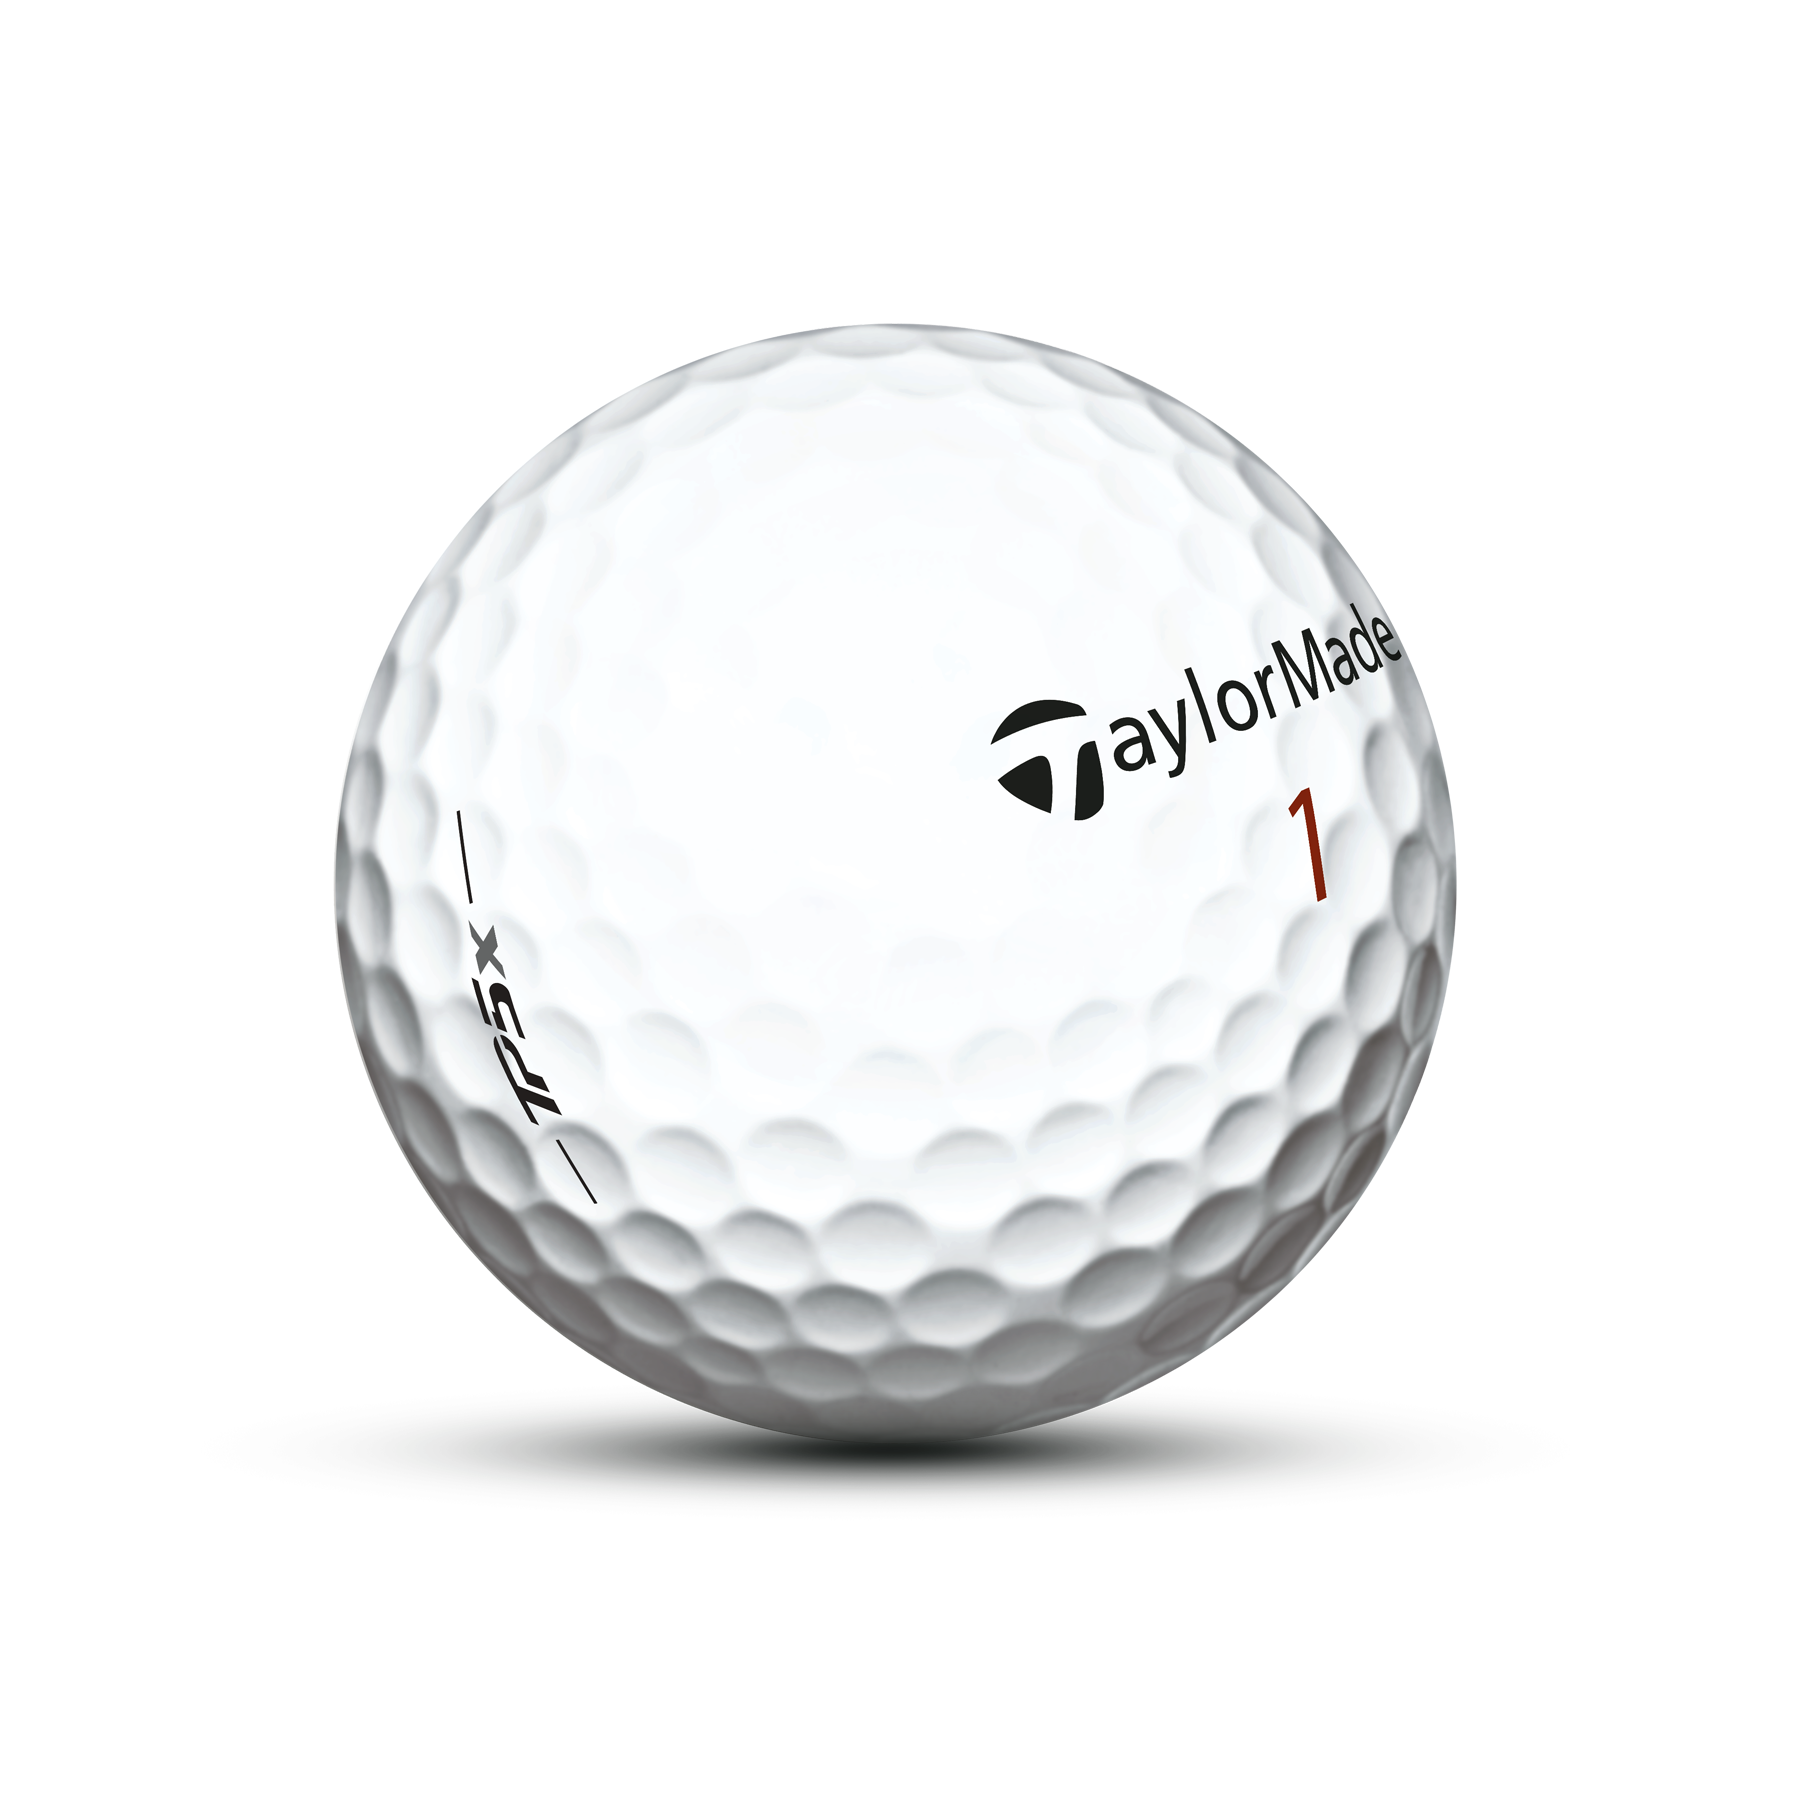 TaylorMade unveil TP5 and TP5x balls